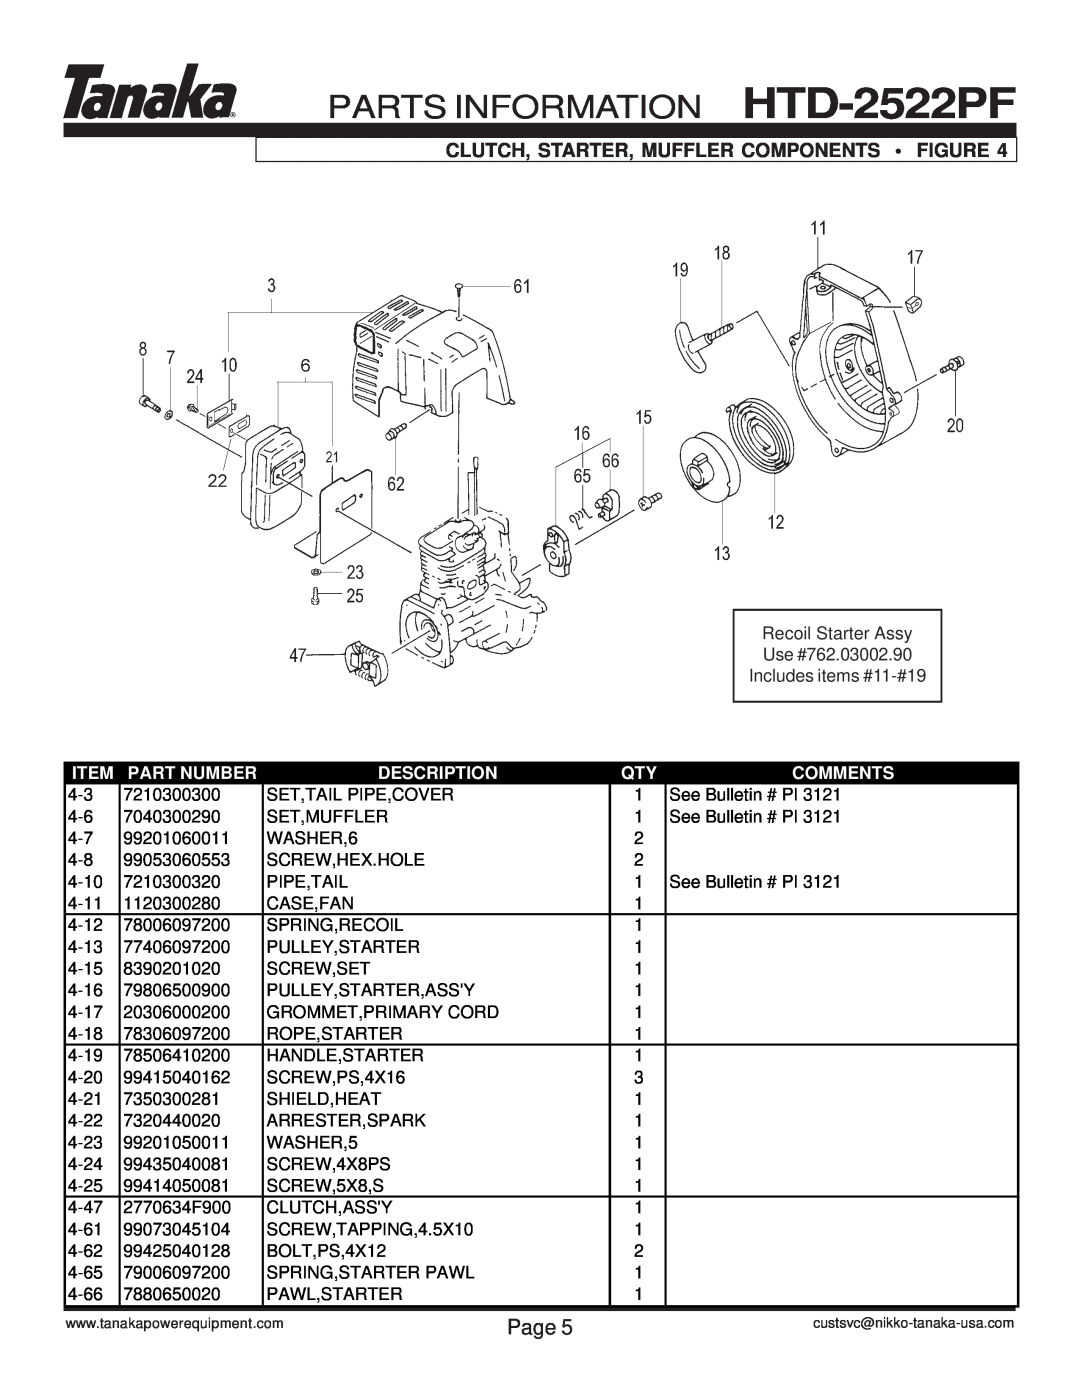 Tanaka manual Clutch, Starter, Muffler Components Figure, PARTS INFORMATION HTD-2522PF, Page, Part Number, Description 